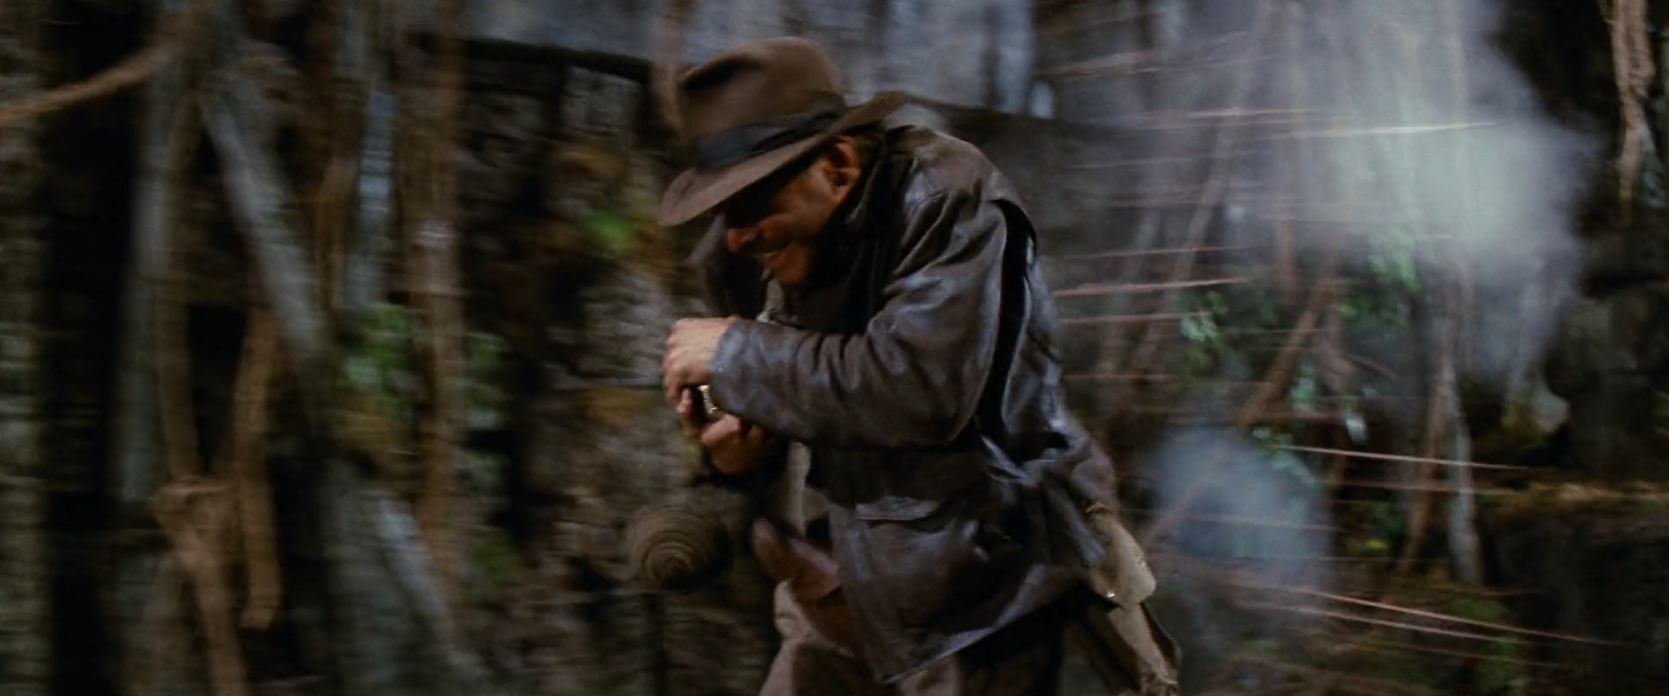 Indiana Jones and the Raiders of the Lost Ark - Dart trap firing